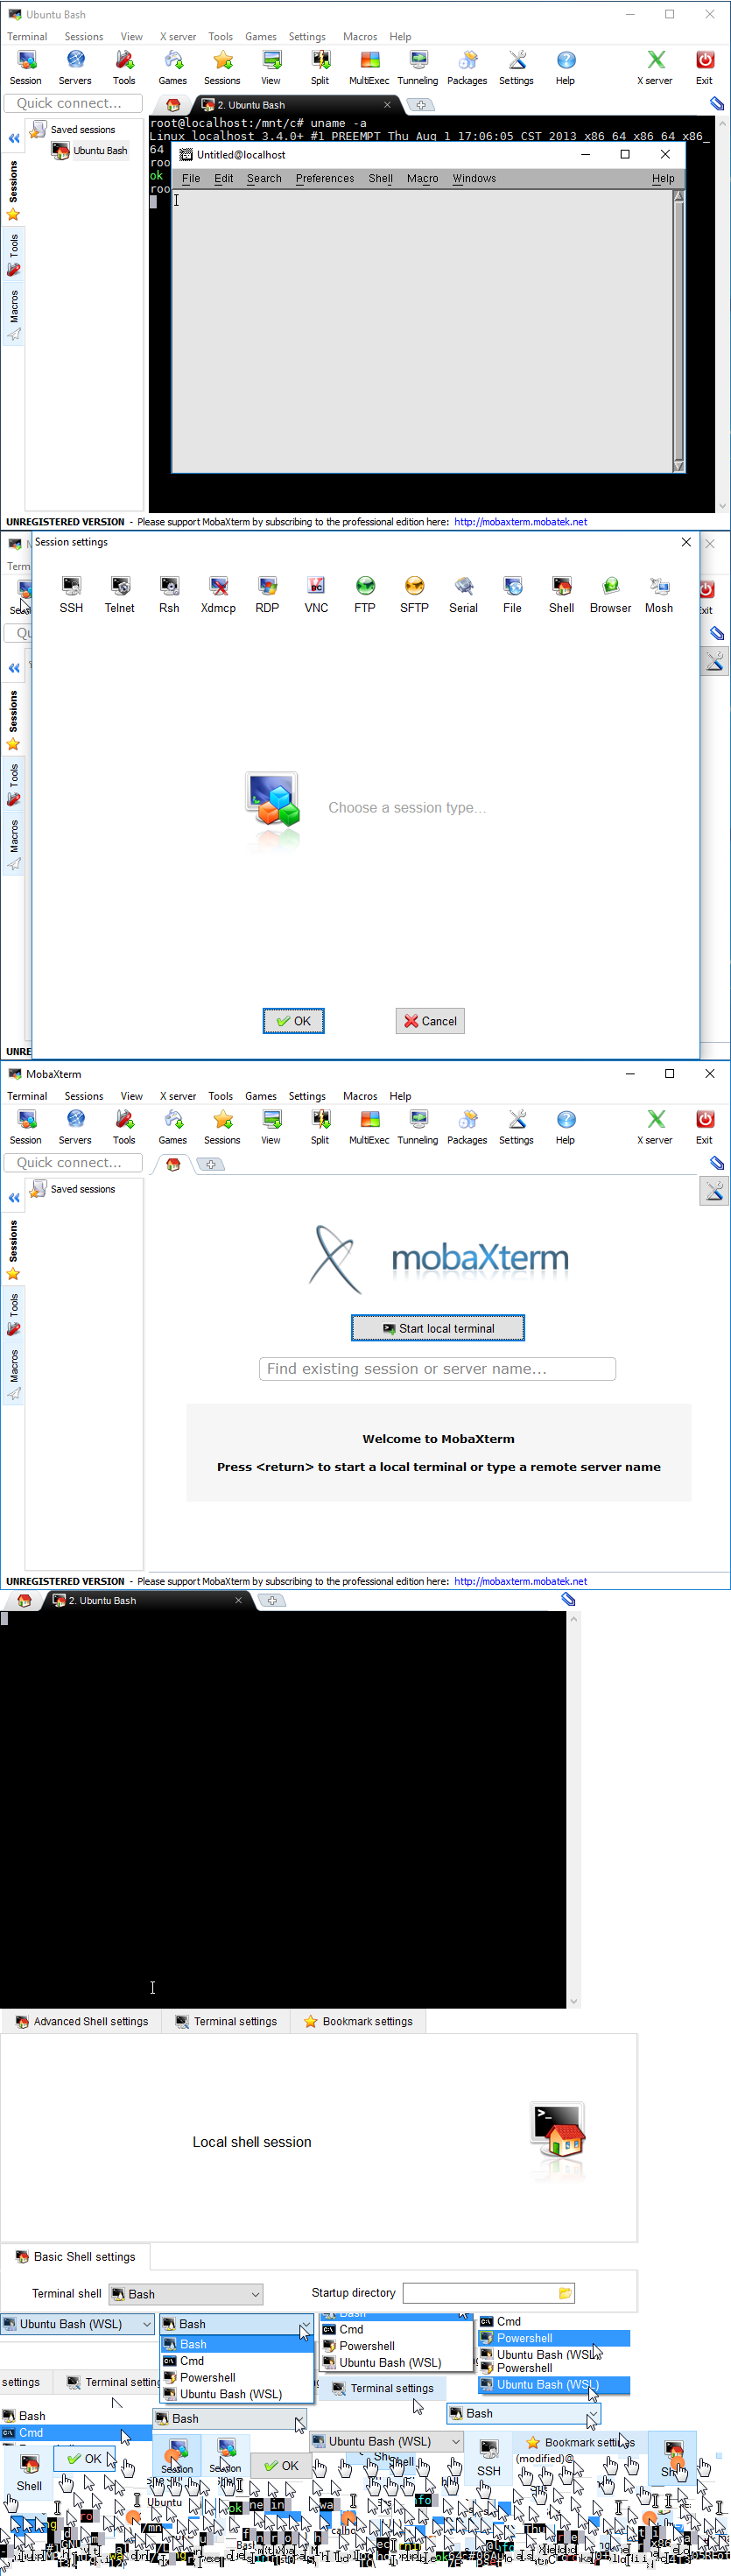 download the last version for windows MobaXterm Professional 23.2